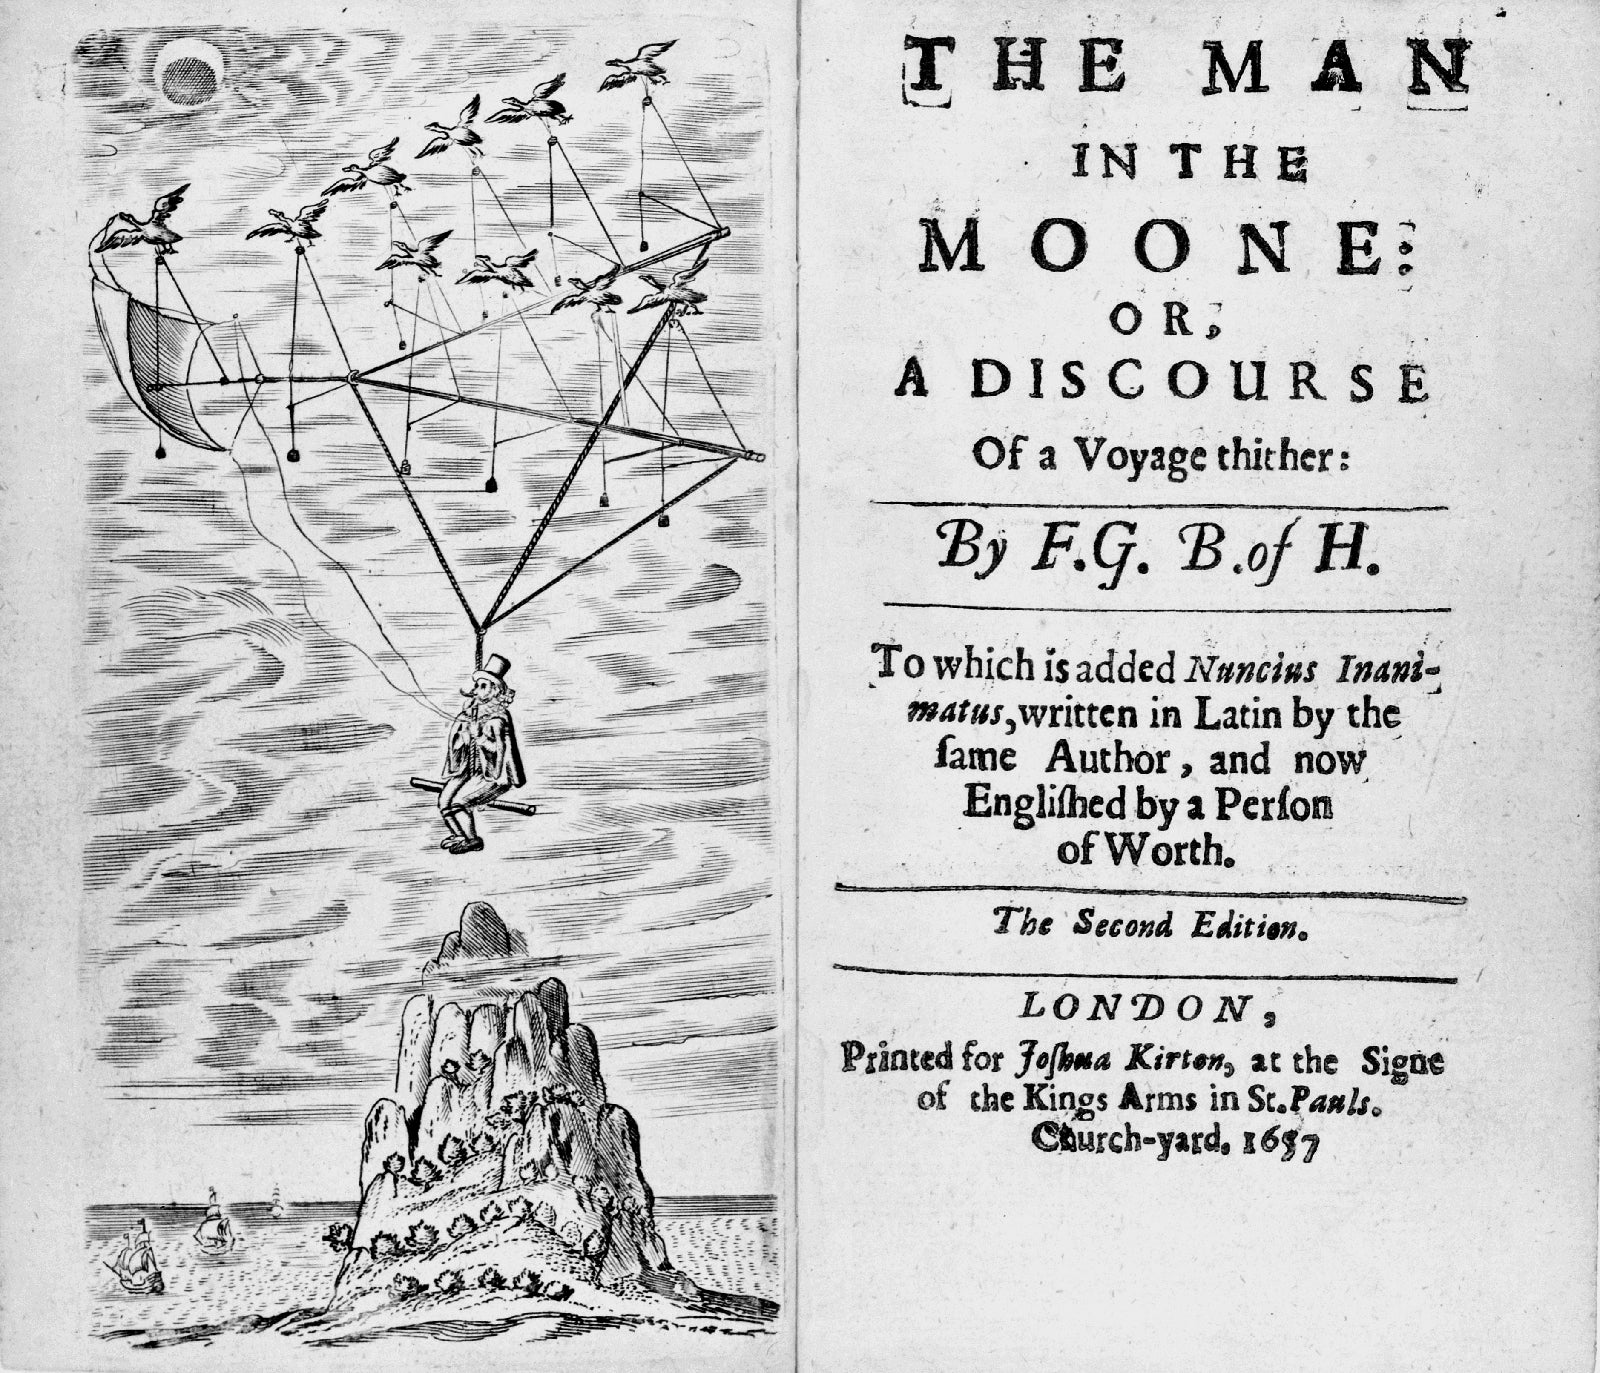 The frontispiece and title page of the second edition of Francis Godwin's The Man in the Moone. (Image: Wikimedia Commons)